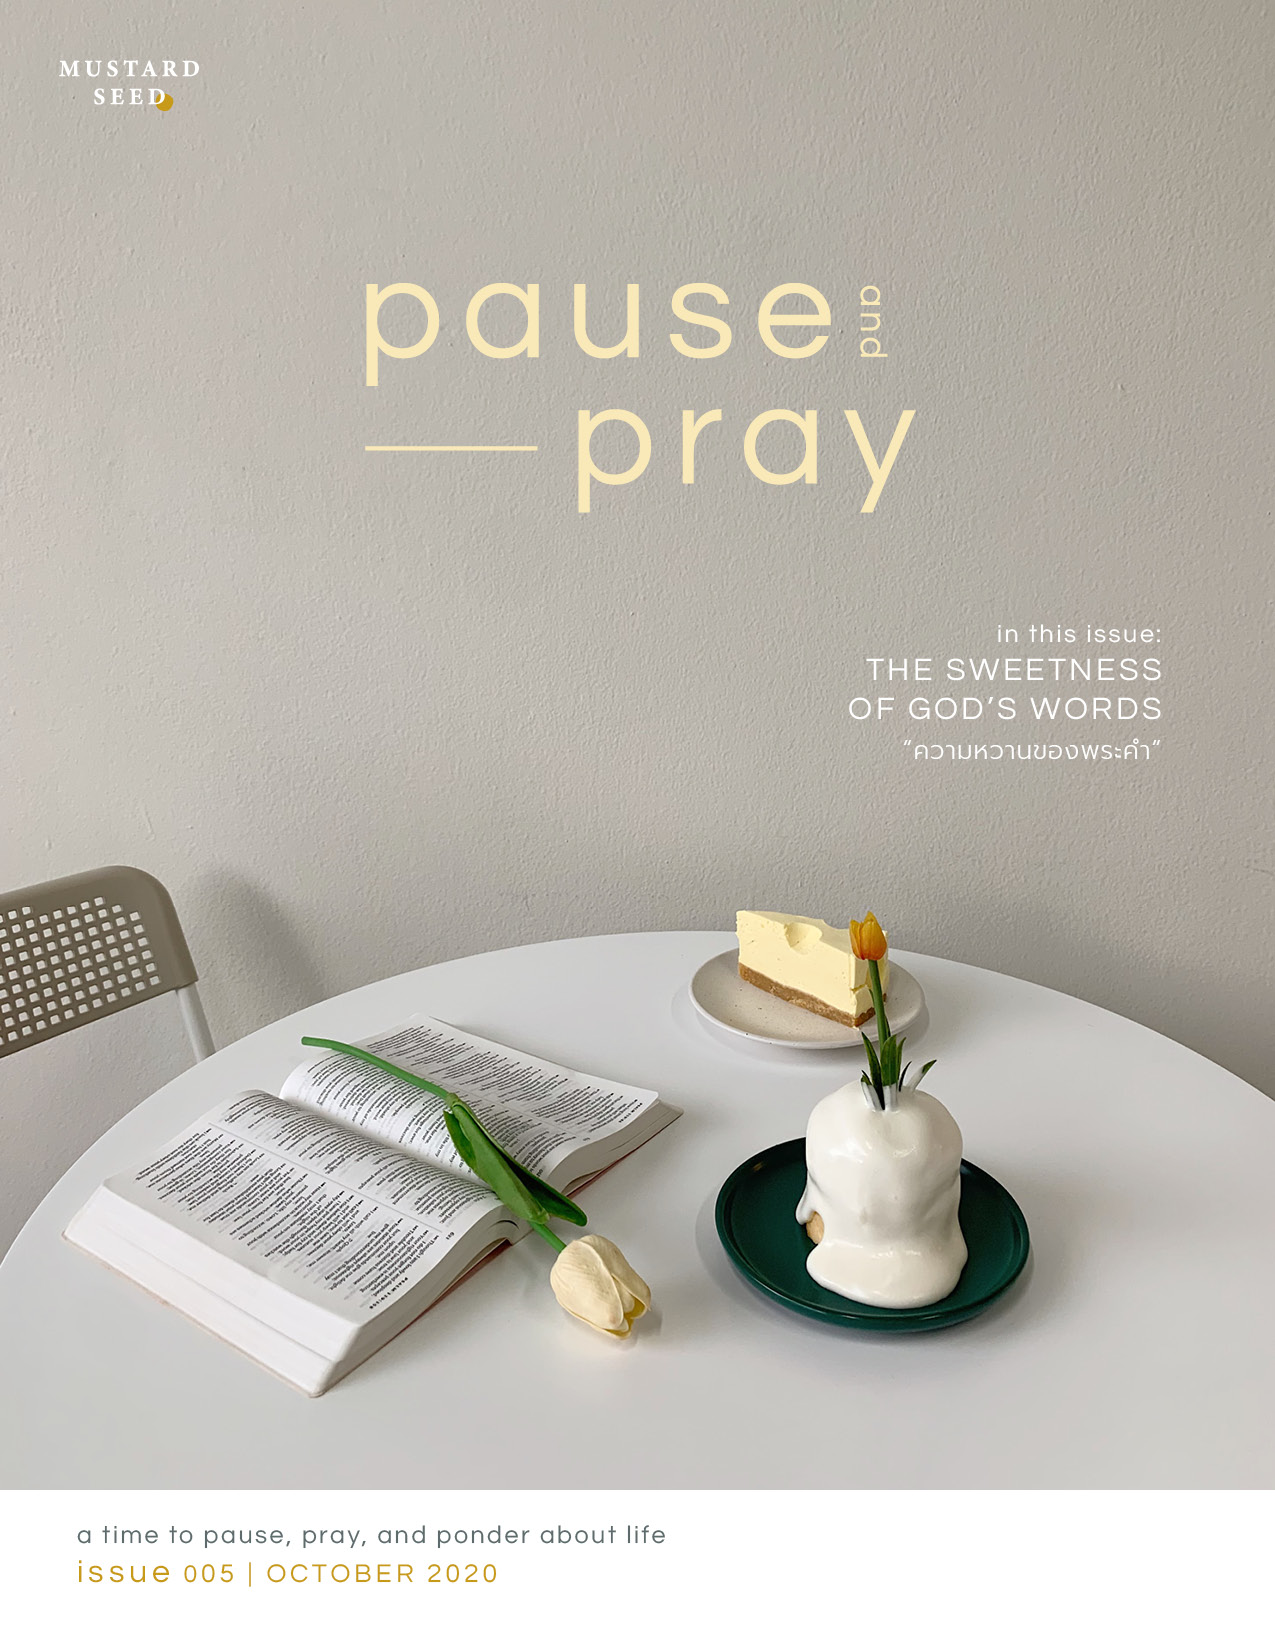 PAUSE & PRAY | ISSUE 05 “THE SWEETNESS OF GOD’S WORDS”